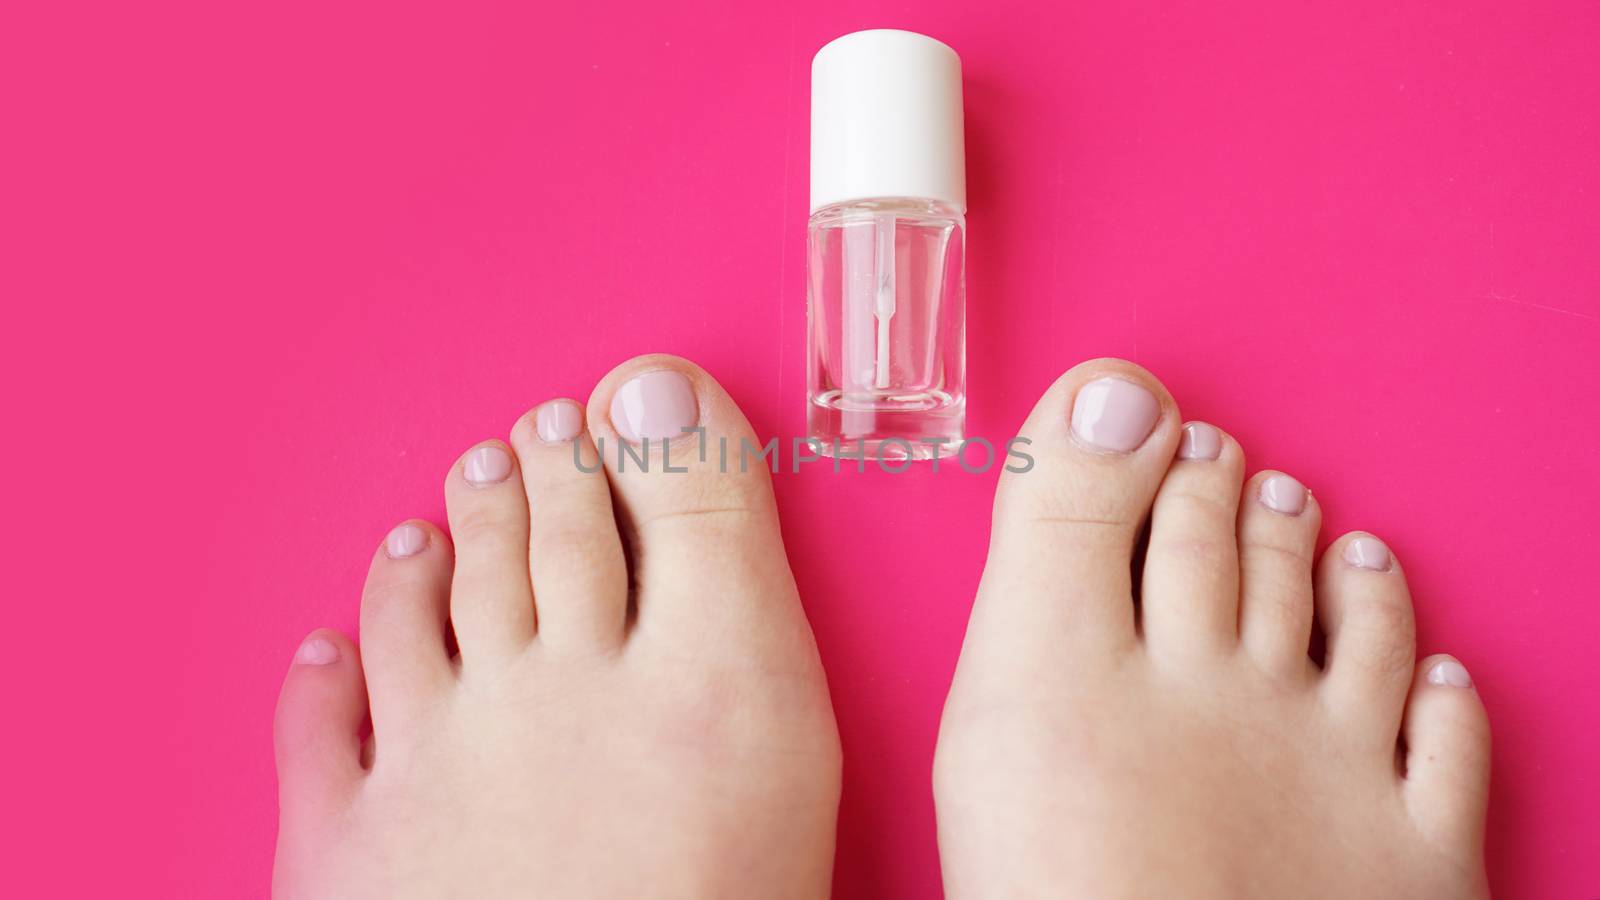 Pedicure with transparent nail polish on pink background. Healthy feet, health care